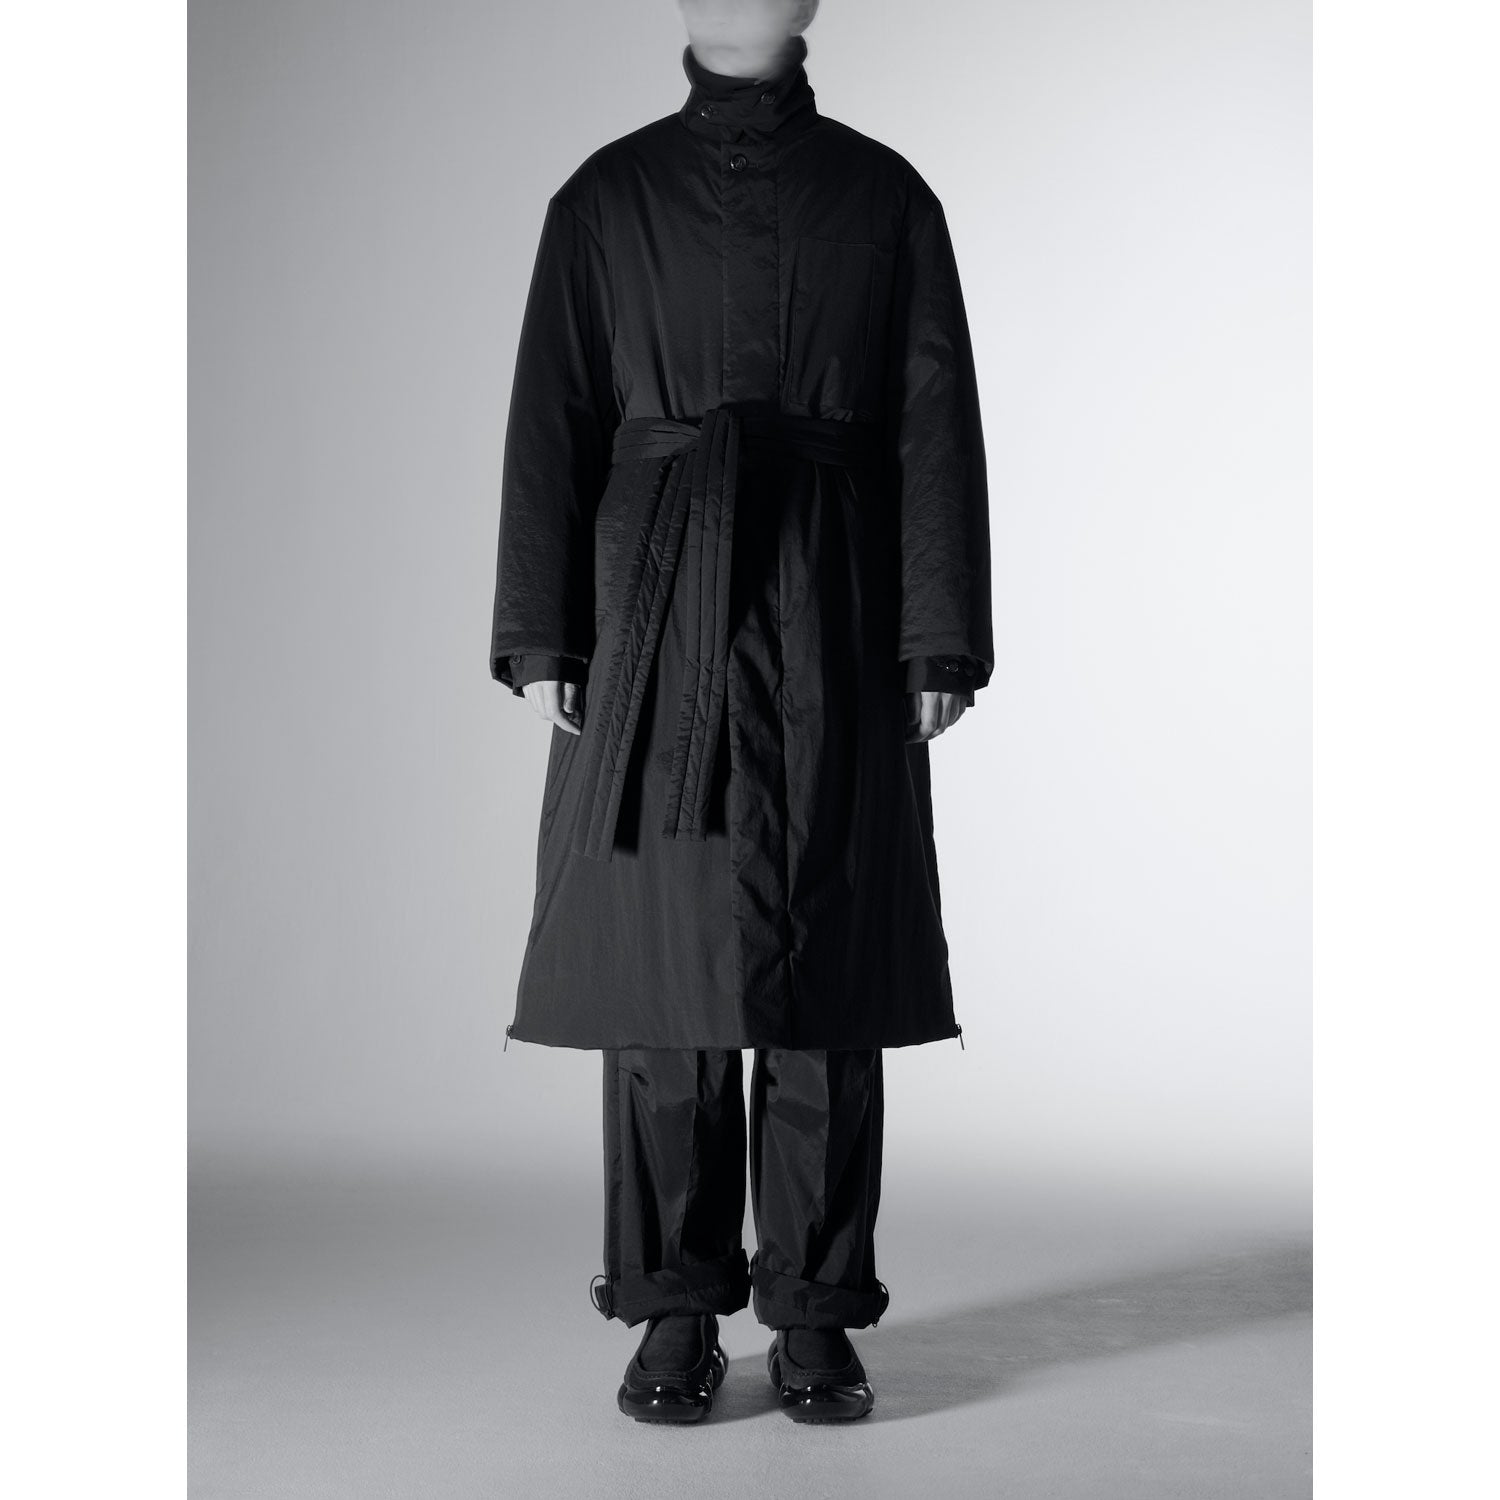 Long Padded Coat / black – th products